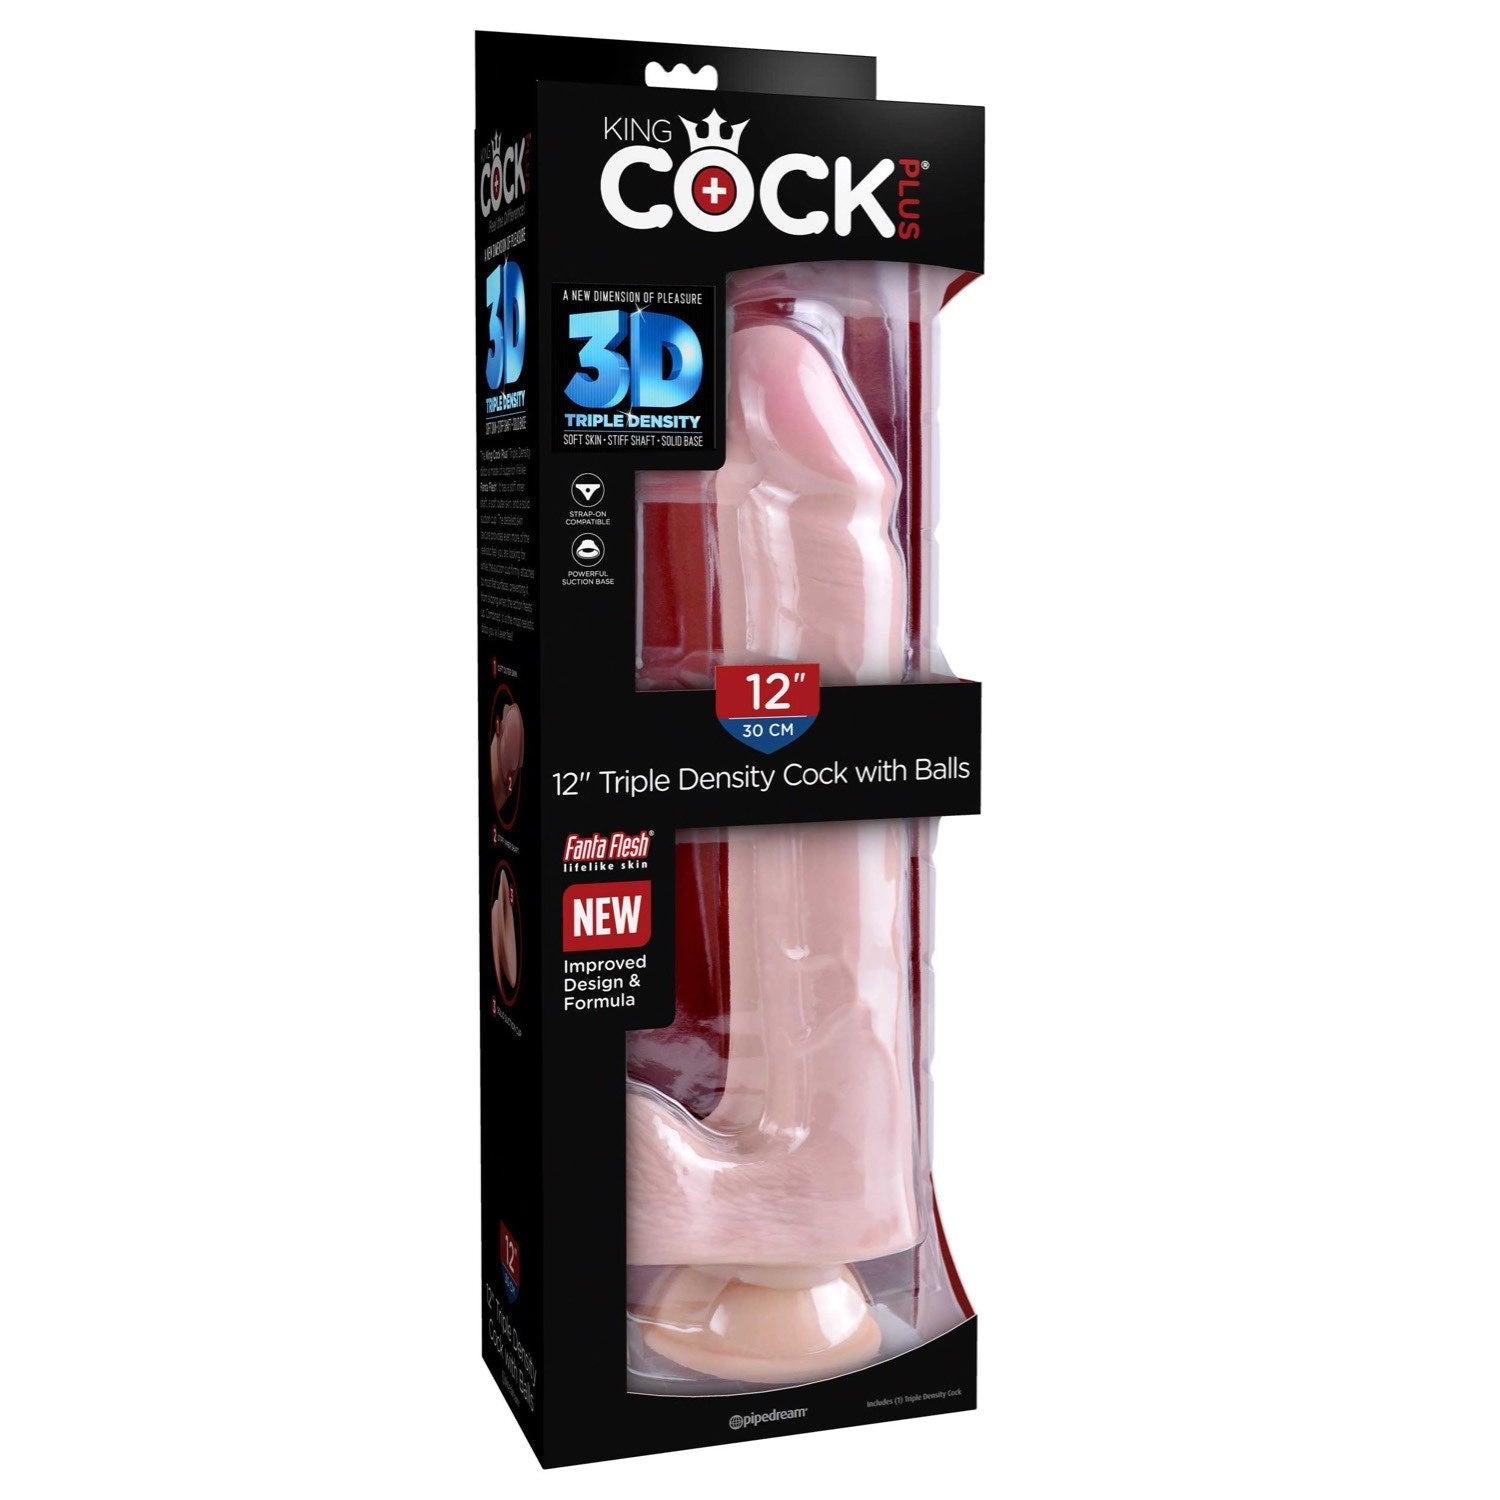 King Cock Plus 12&quot; Triple Density Cock with Balls - Flesh 30.5 cm Dong by Pipedream